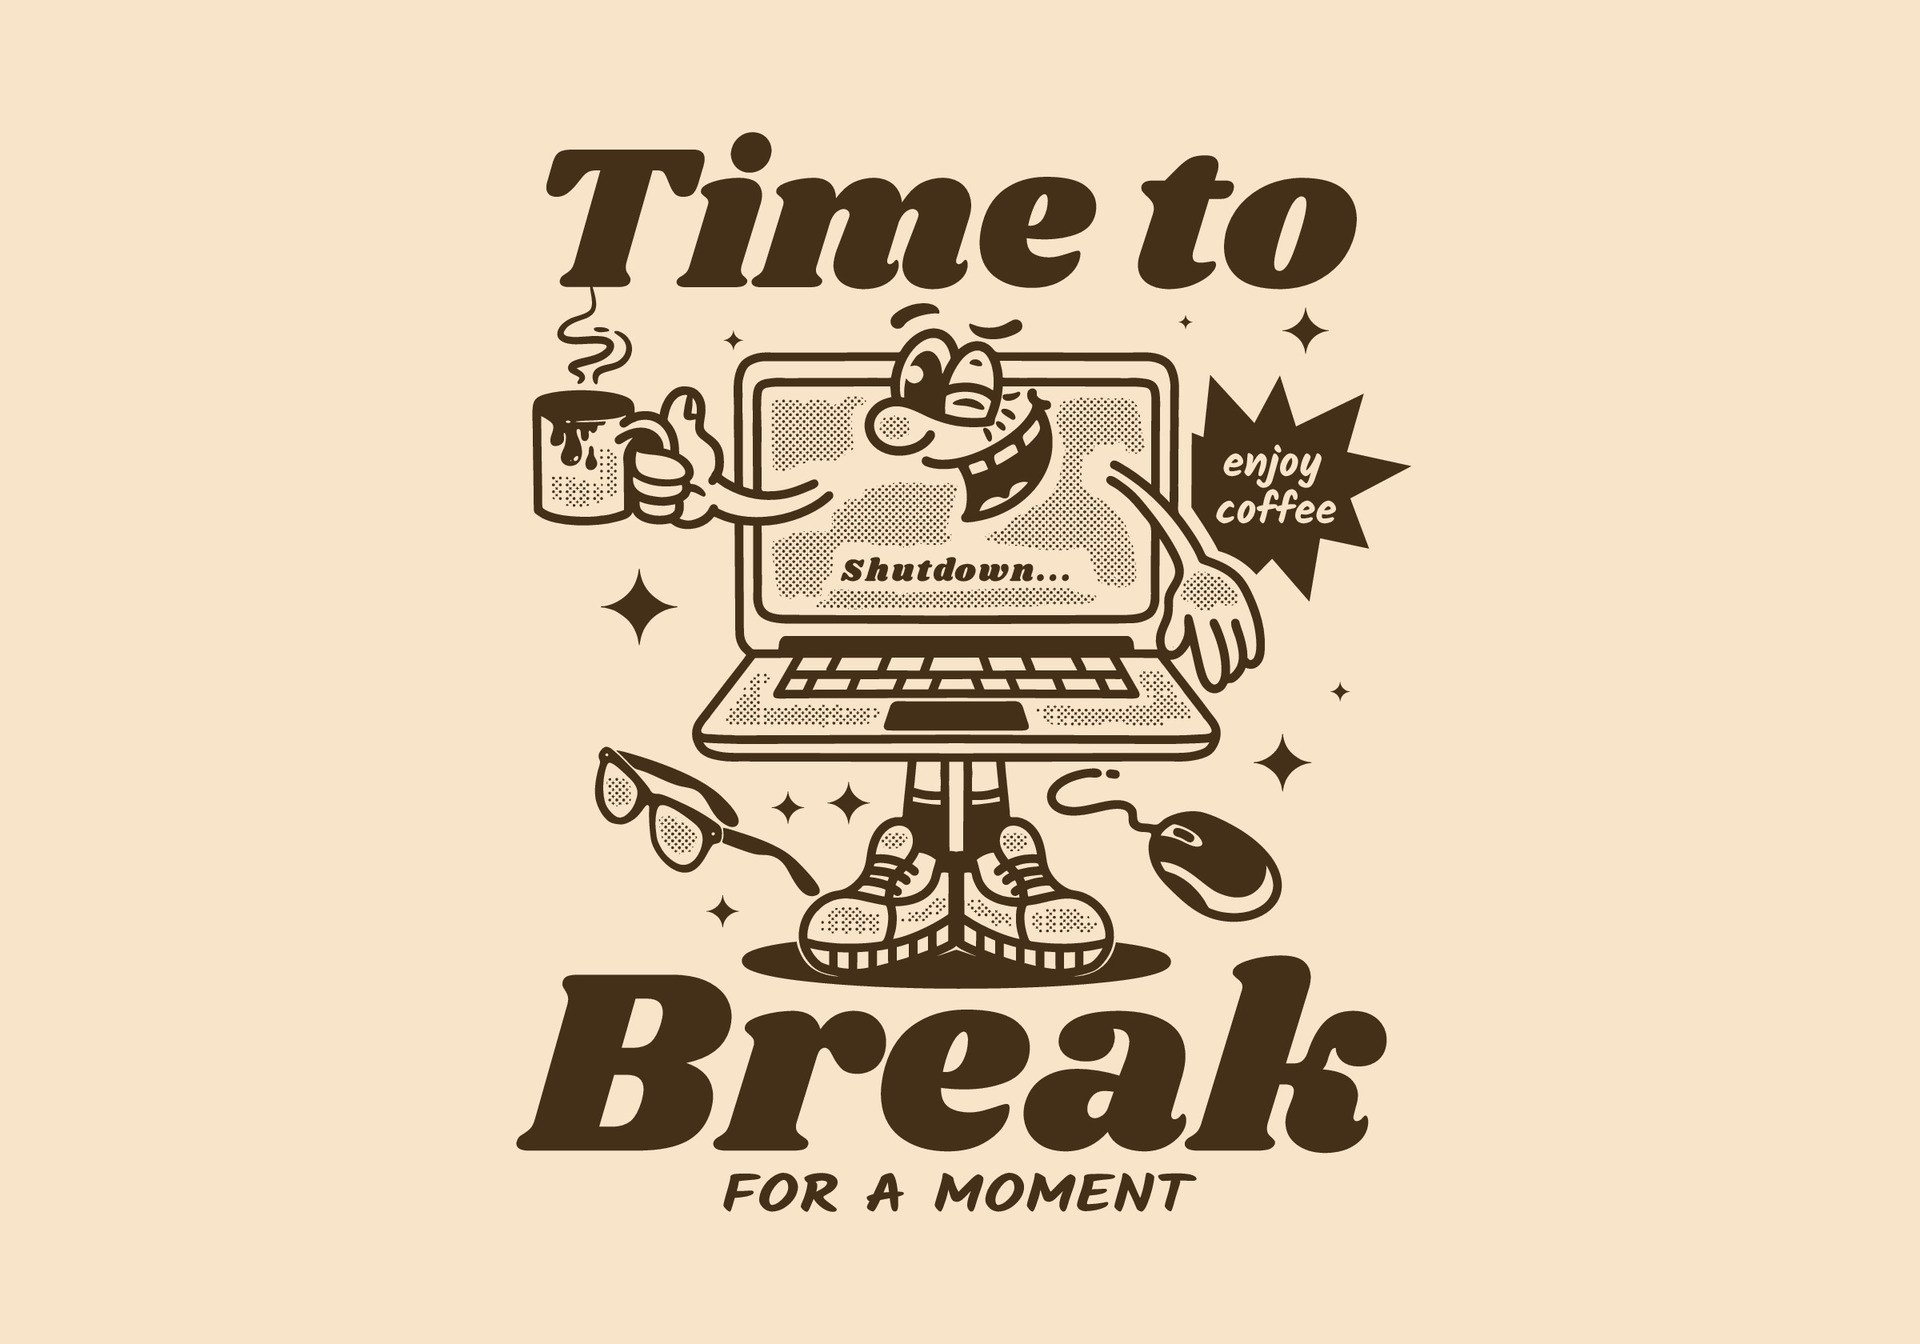 revitalise your work by taking a micro break source vecteezy